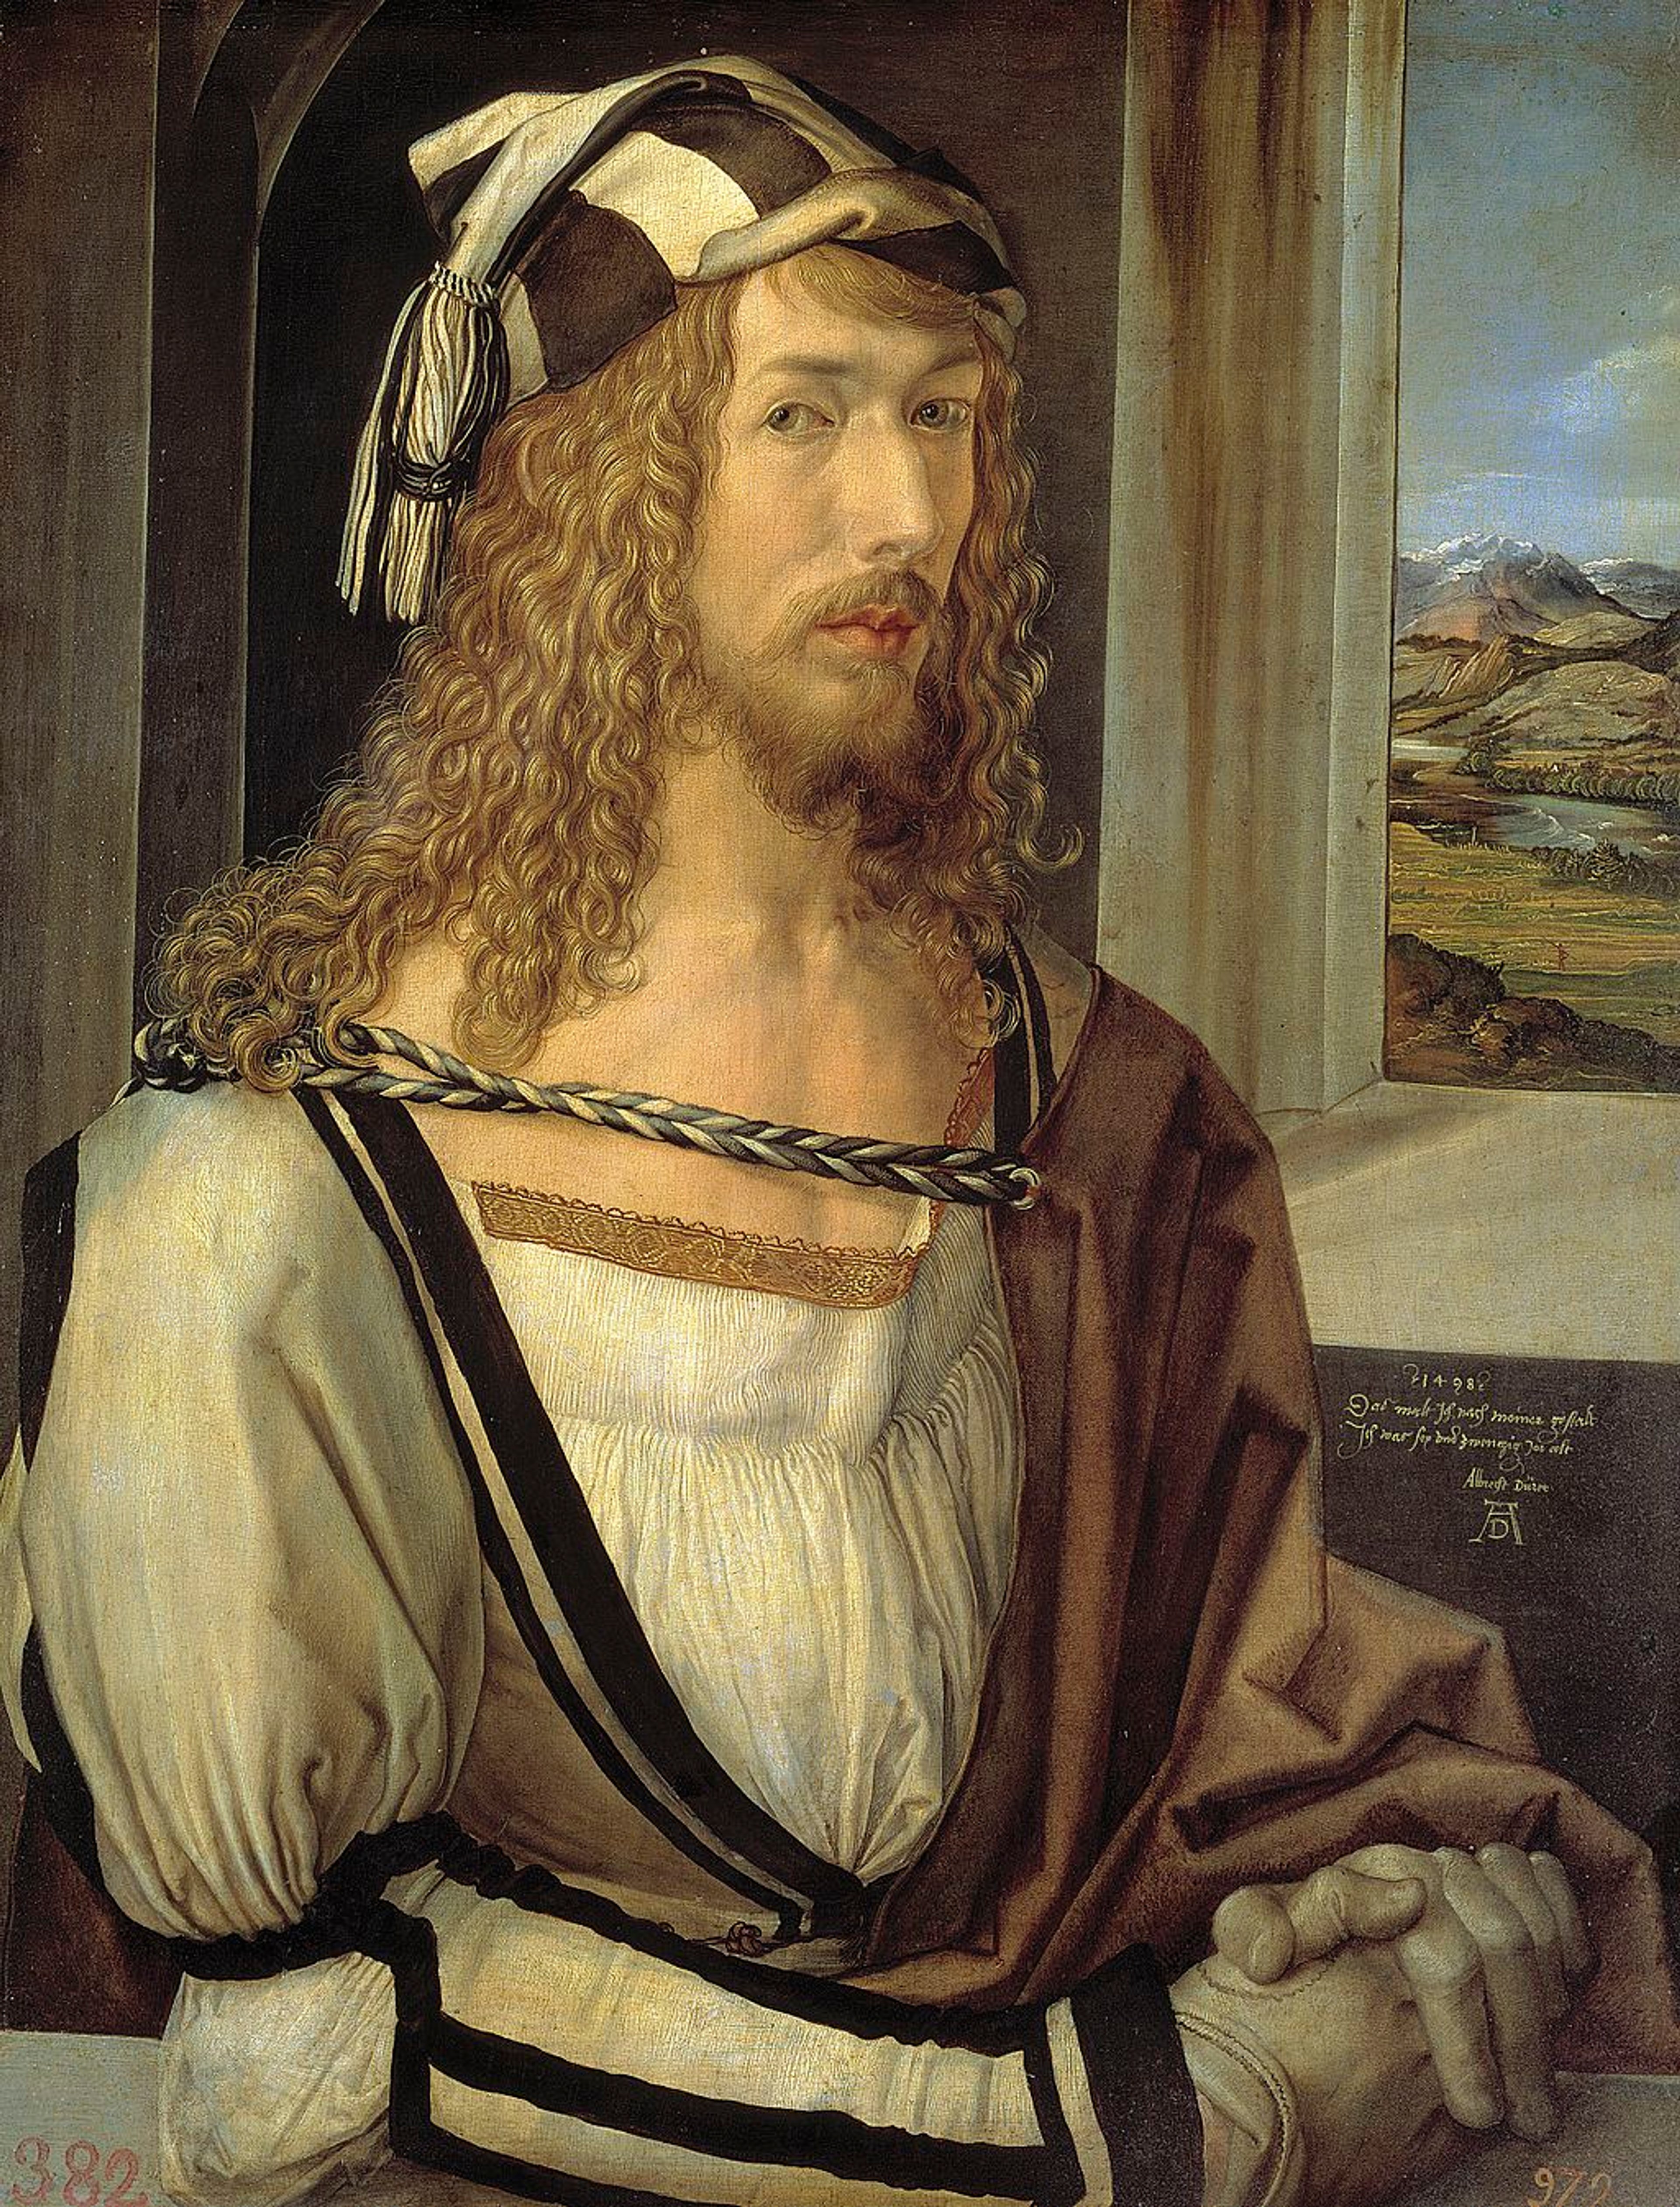 A painted portrait of Albrecht Dürer, a man with long blonde hair, who's sat in front of a window and wearing robes and a hat.